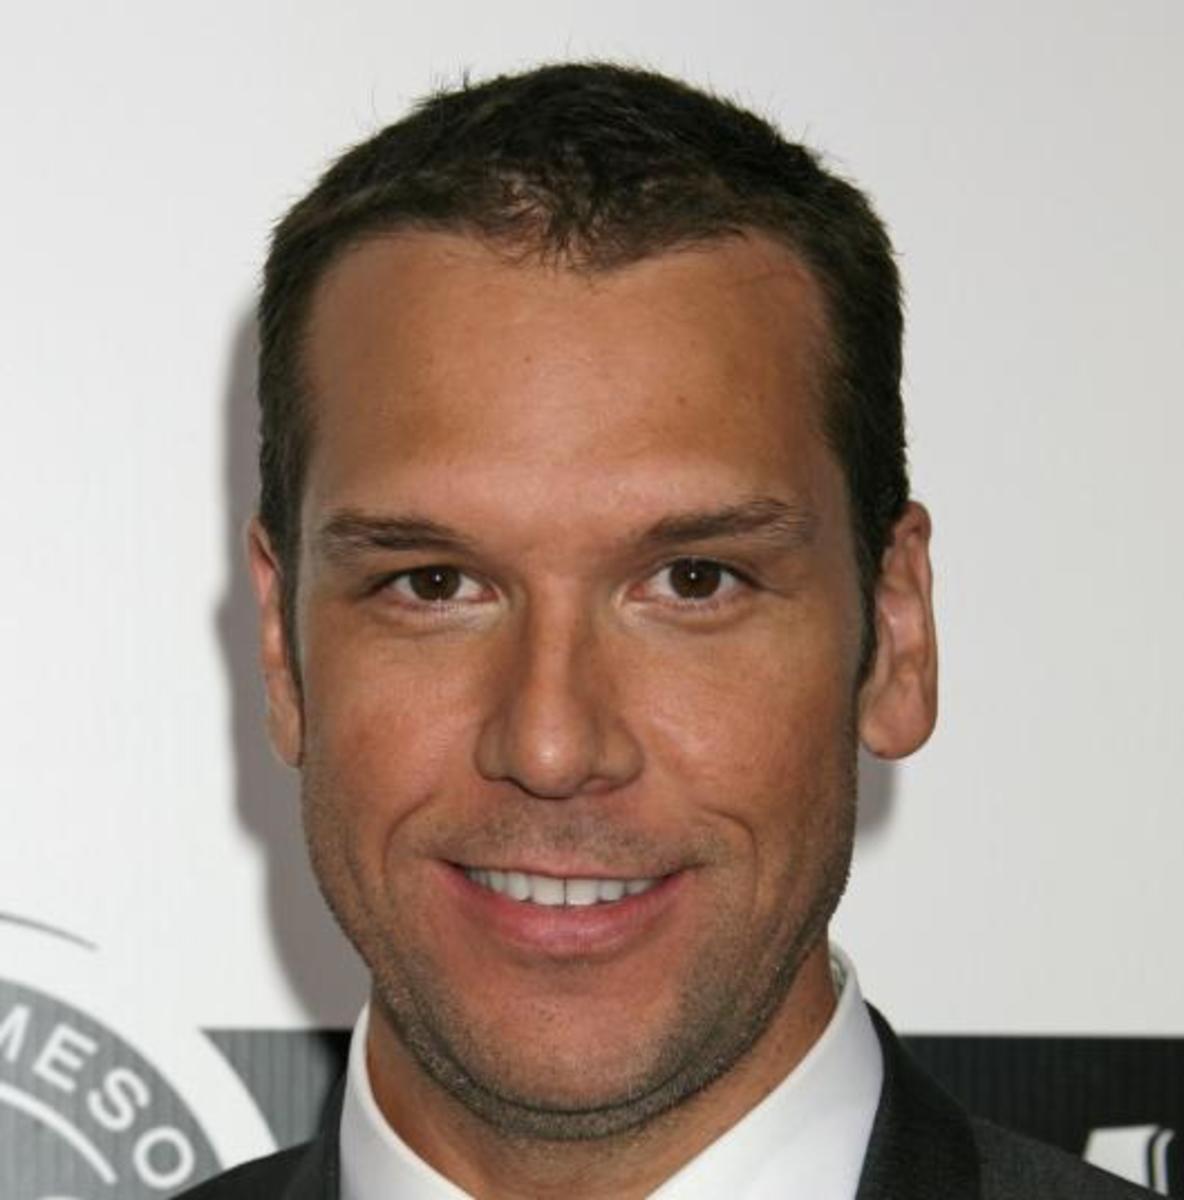 A smiling Dane Cook poses for a photo